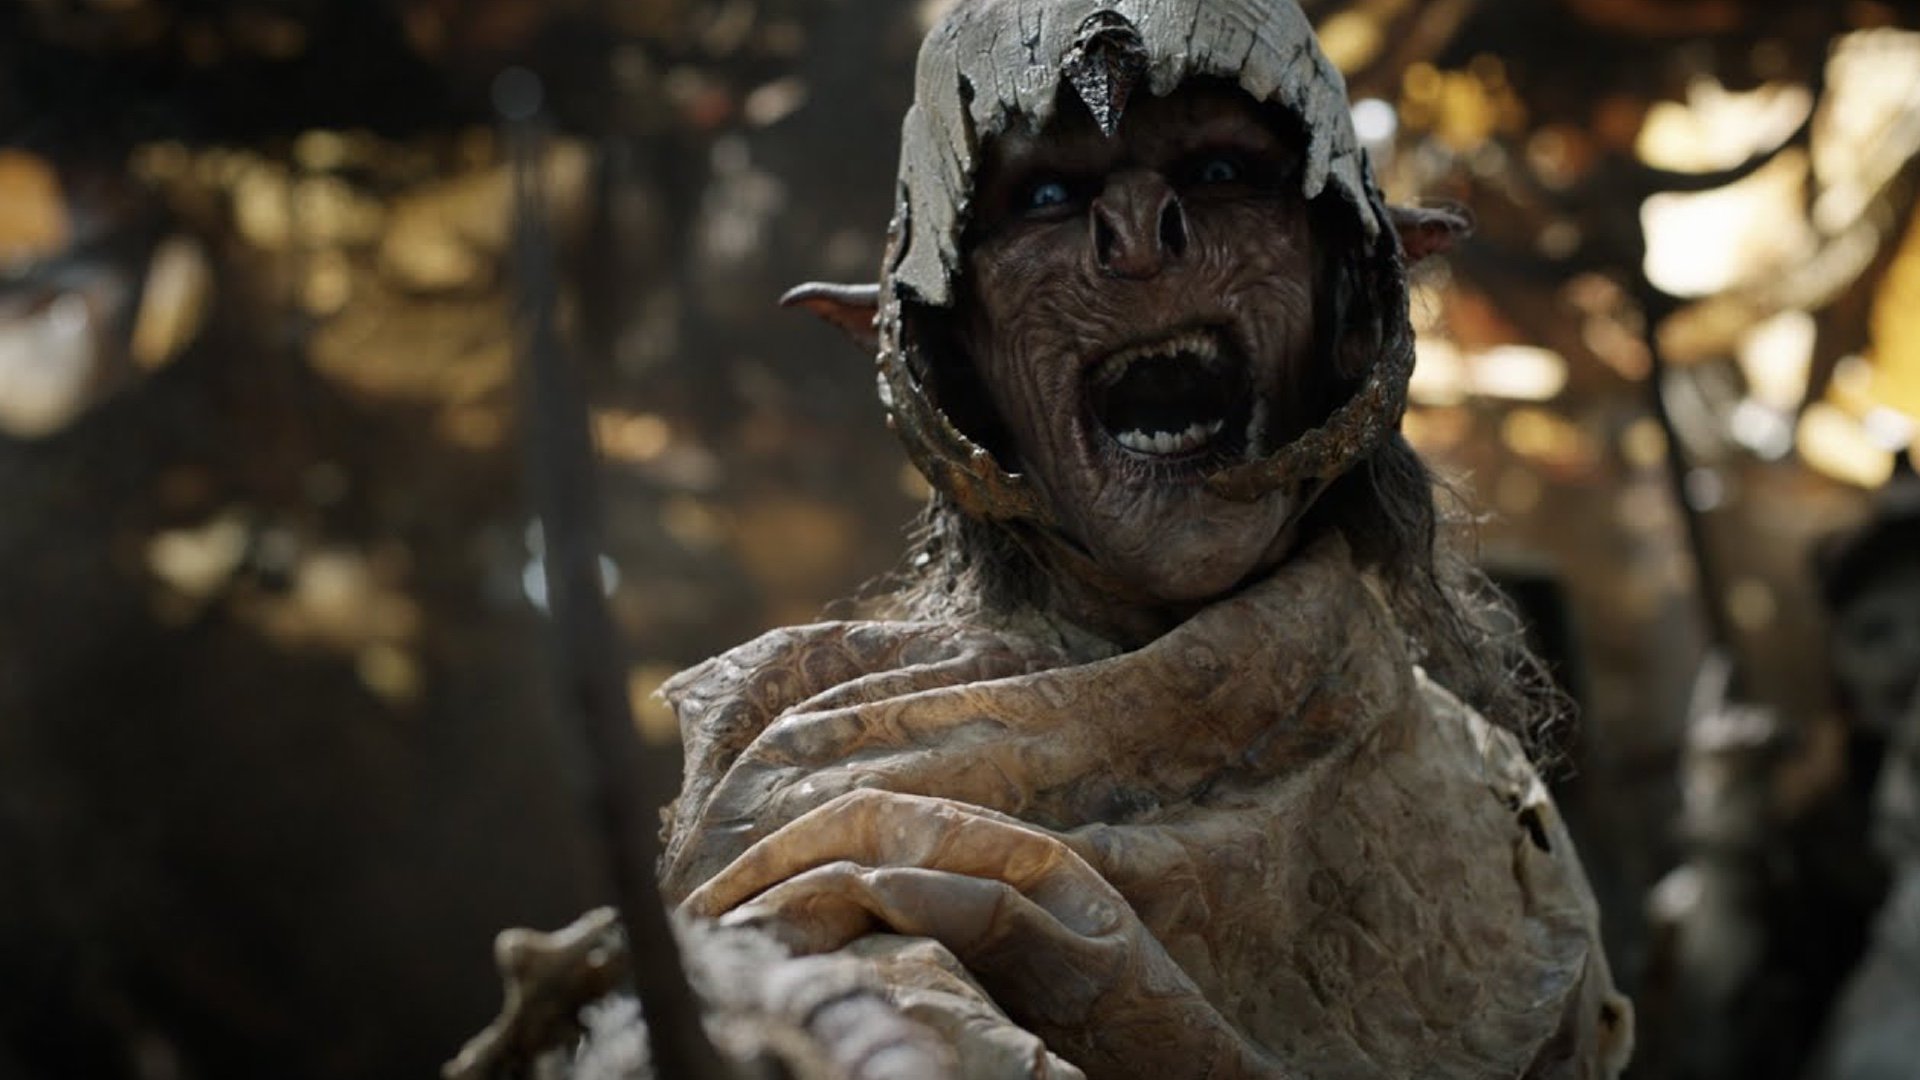 battles 'Lord of the Rings' trolls by pausing ability to